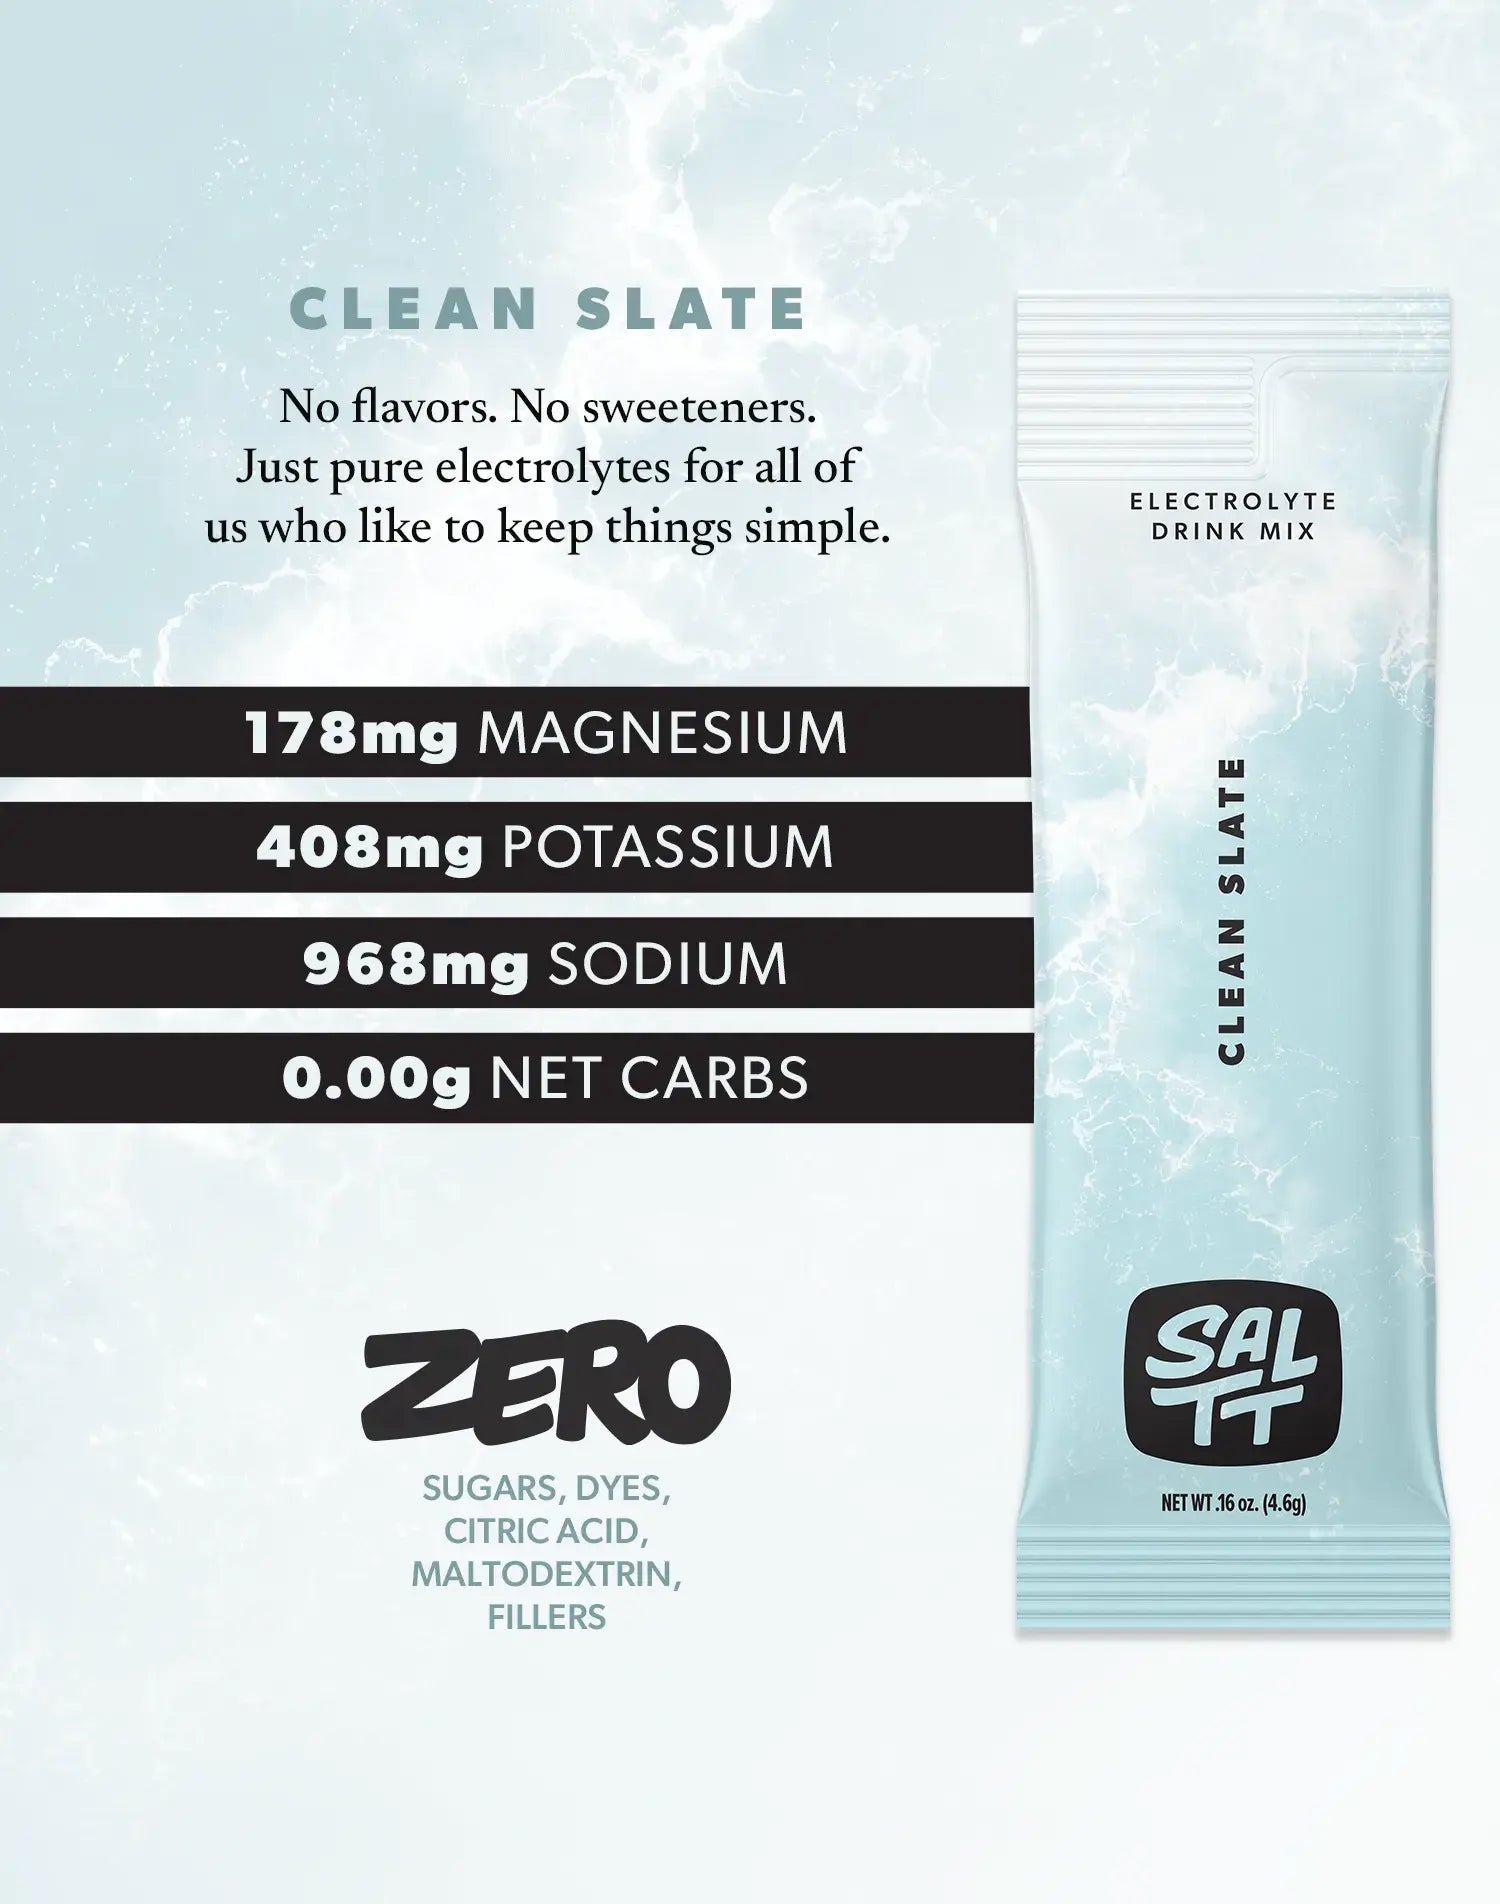 Nutrition for Clean Slate flavor. Clean Slate has 178mg Magnesium, 408mg Potassium, 968mg Sodium, 0.00g net carbs. Zero sugars, dyes, citric acid, maltodextrin, or fillers. See nutrition dropdown for complete supplement facts.